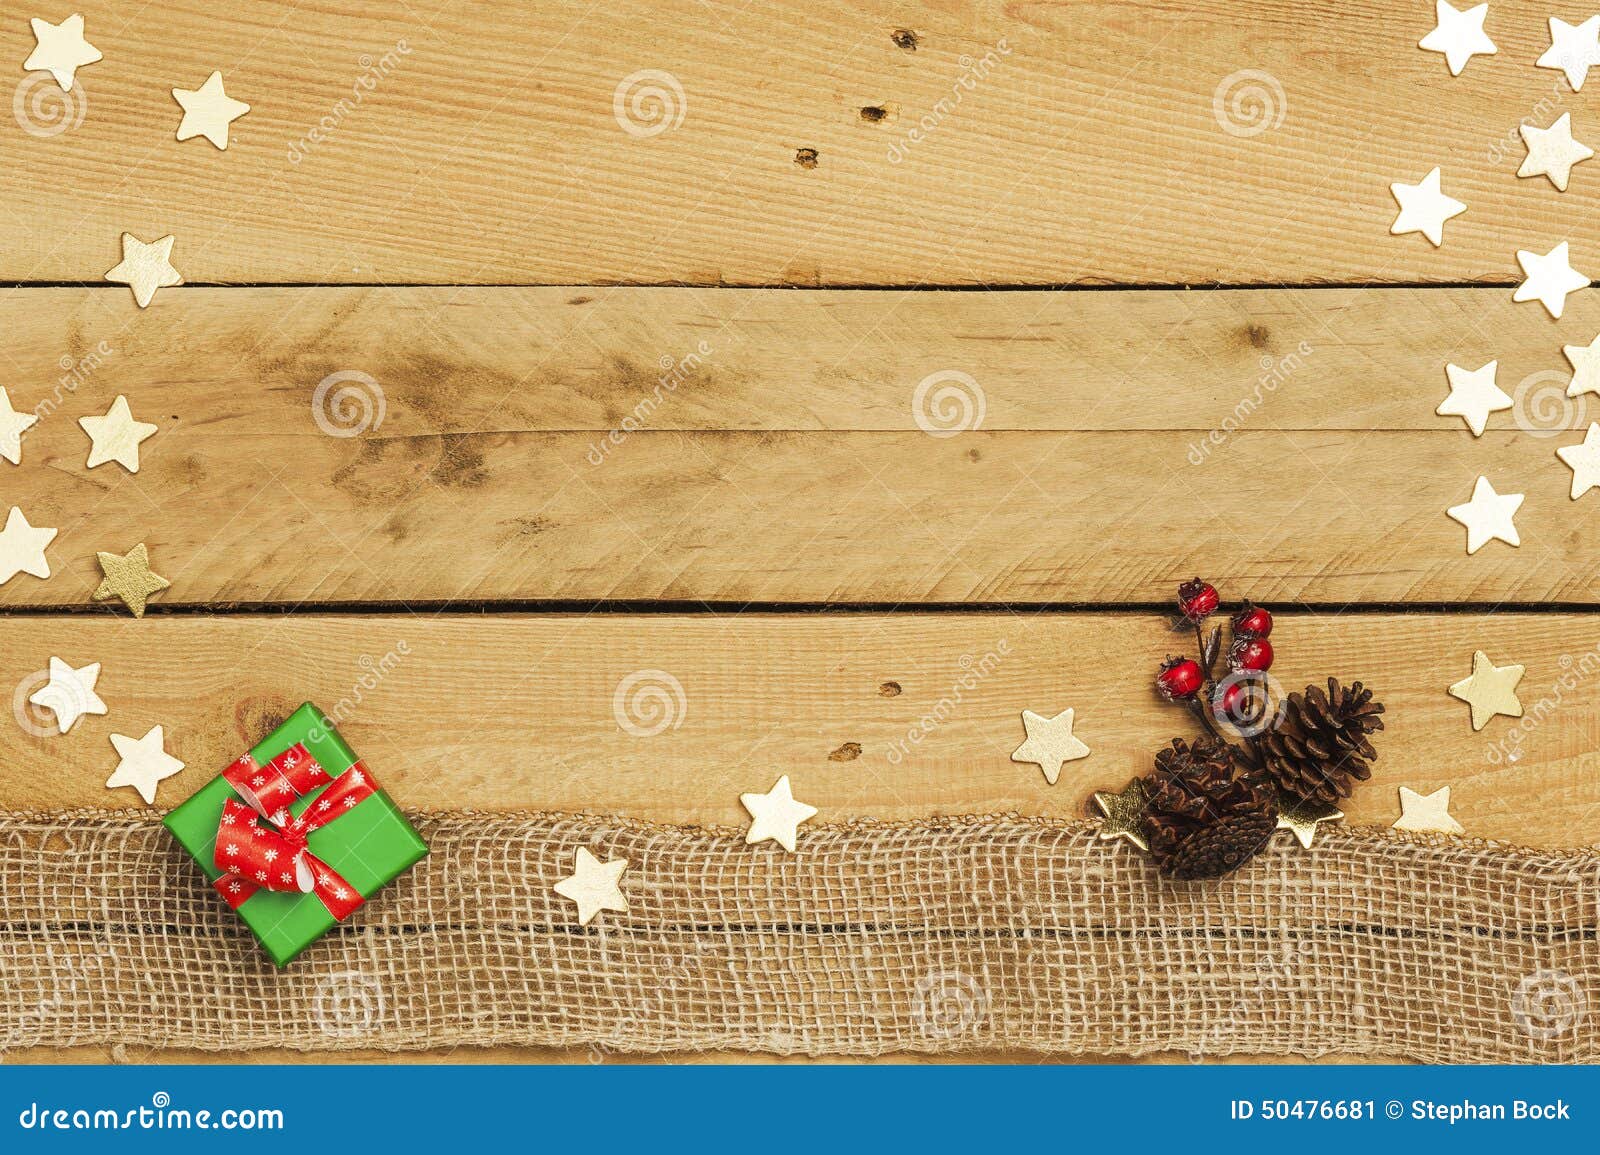 Christmas, Decoration and Stars on Wooden Background Stock Image ...